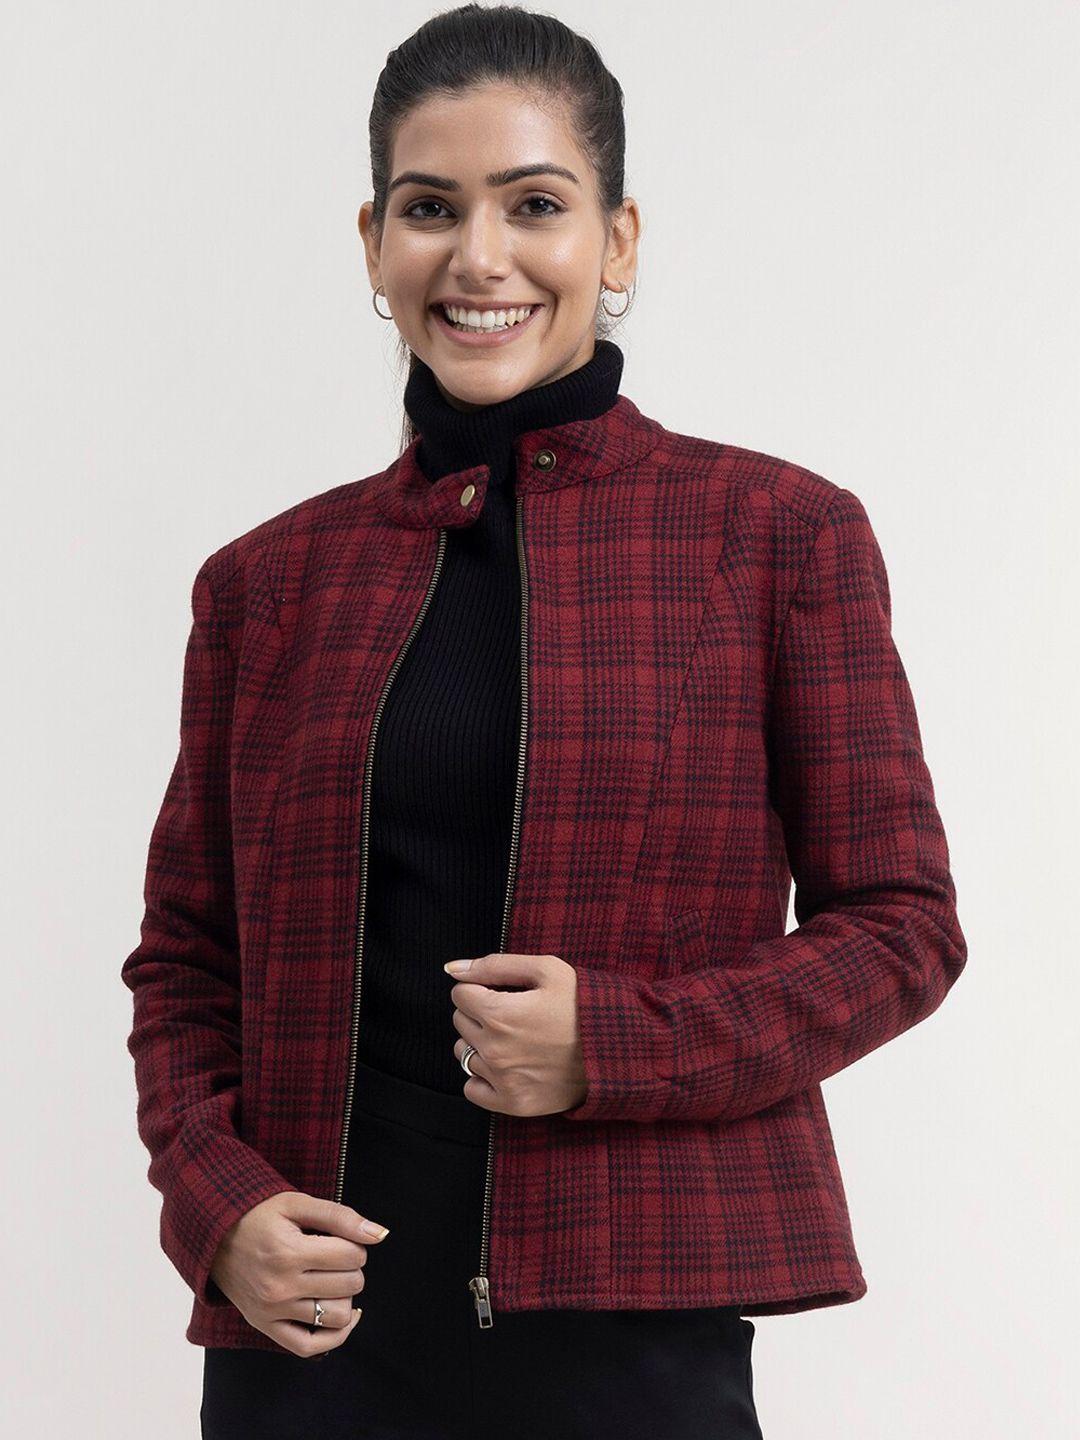 fablestreet-women-maroon-navy-blue-checked-tailored-jacket